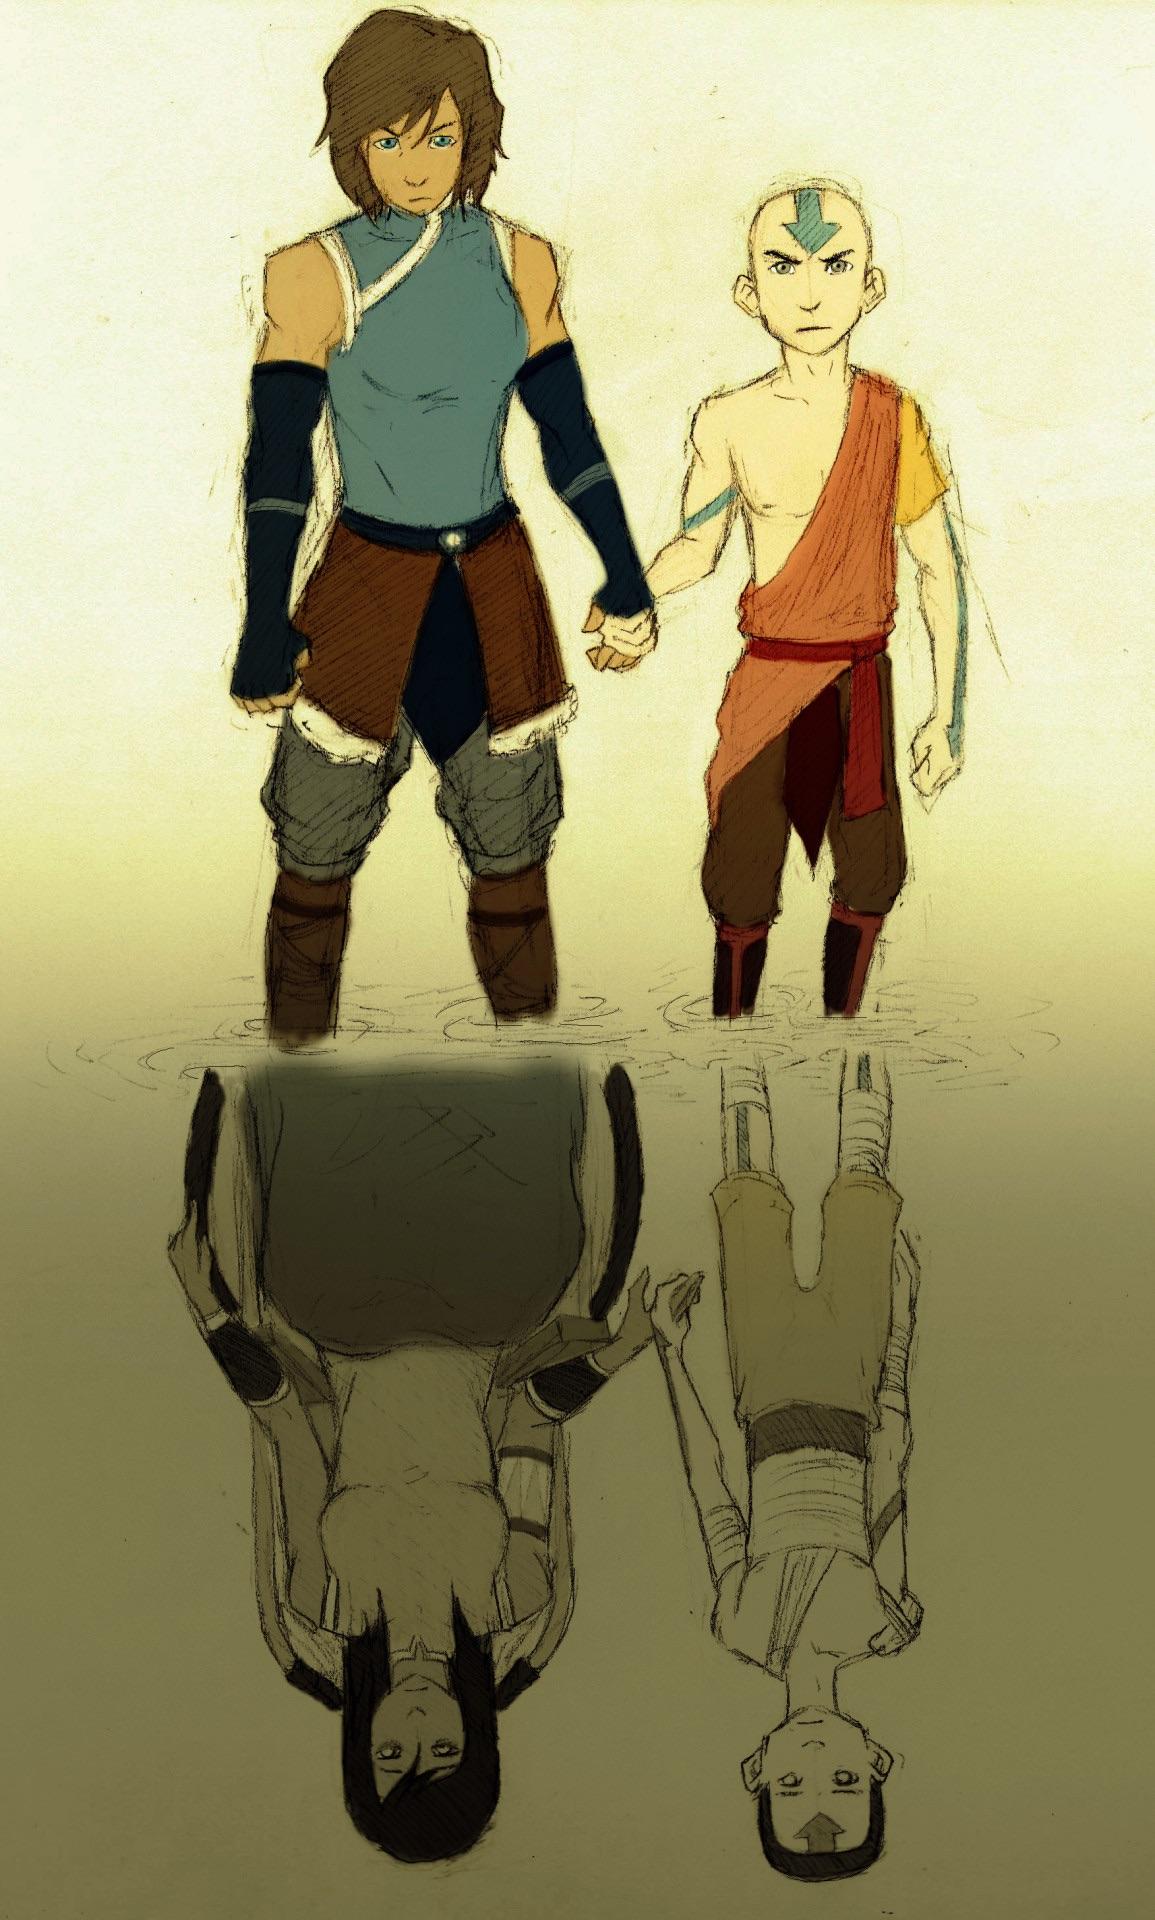 Reflections of Aang and Korra in their most vulnerable moments